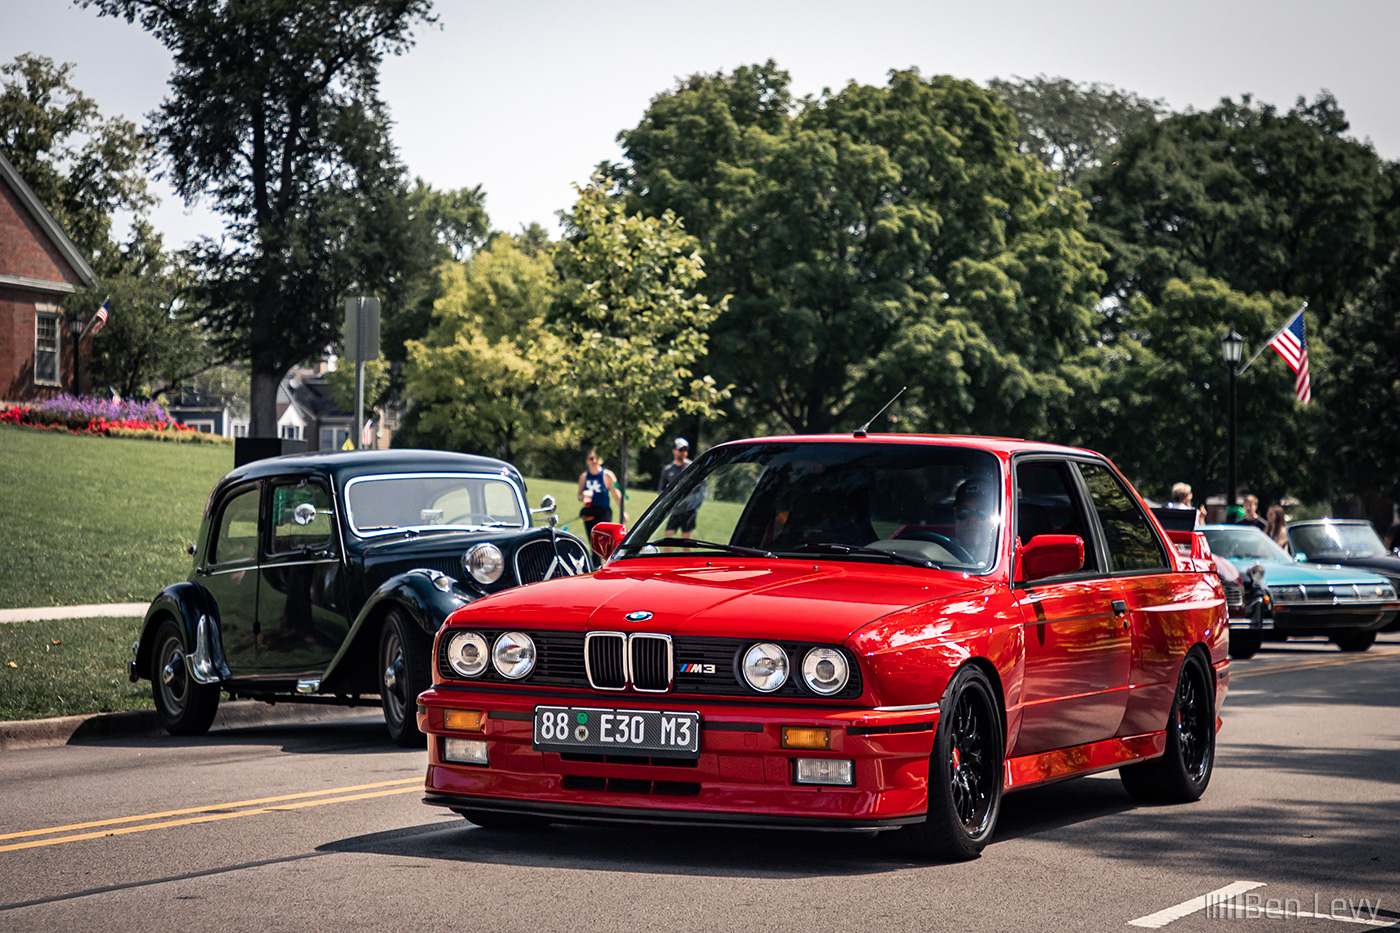 Red E30 BMW M3 at Hinsdale Cars and Coffee